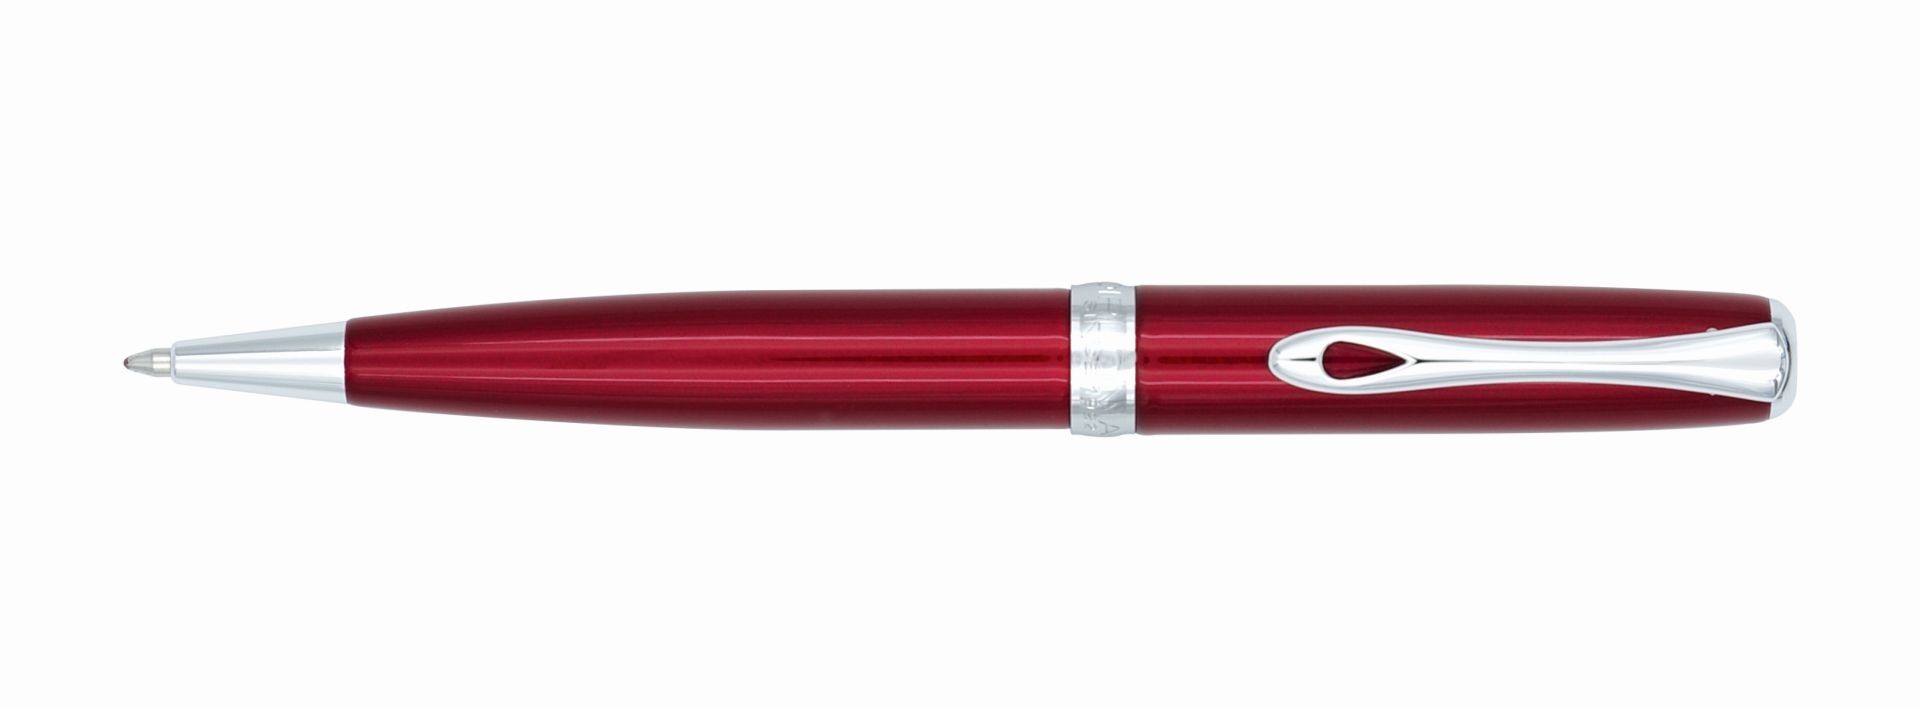 Pix easyflow DIPLOMAT Excellence A2 - Magma Red